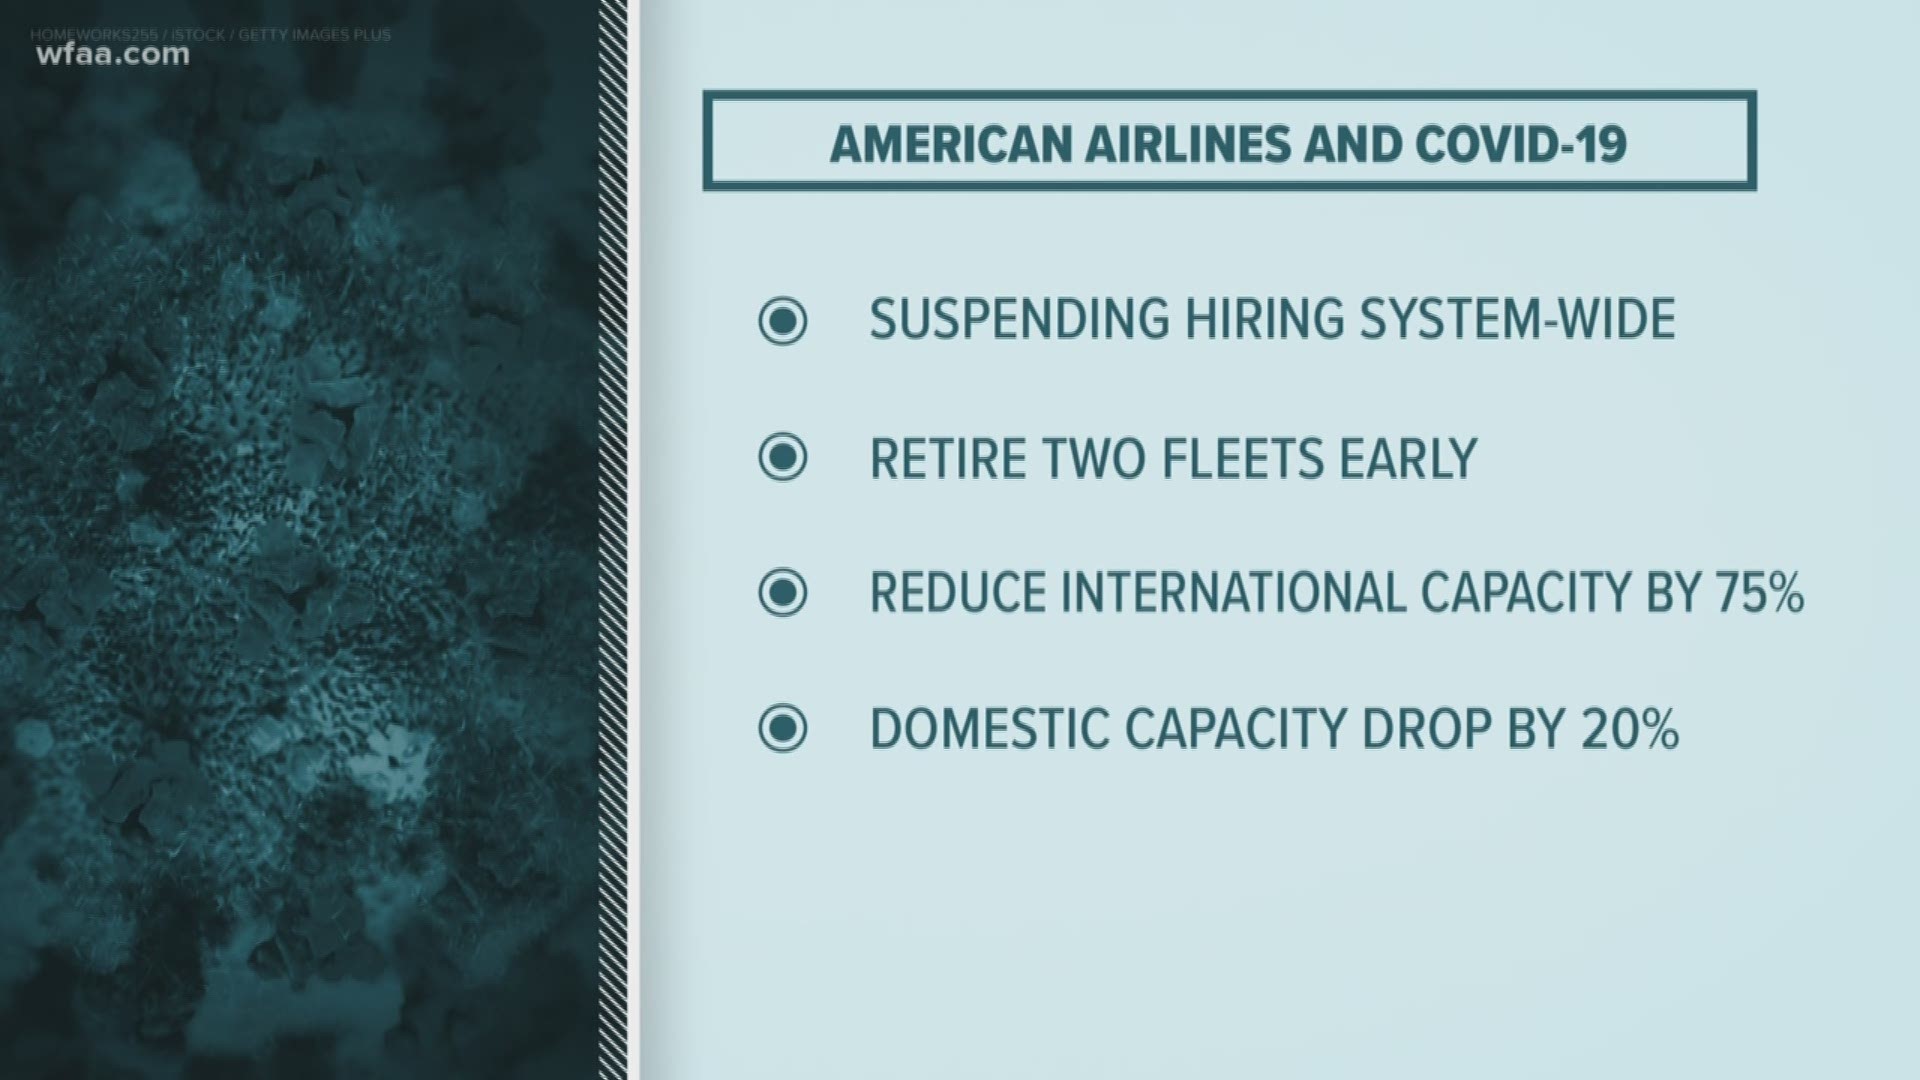 American Airlines is just one of the companies making major changes to deal with the economic impact of the disease.